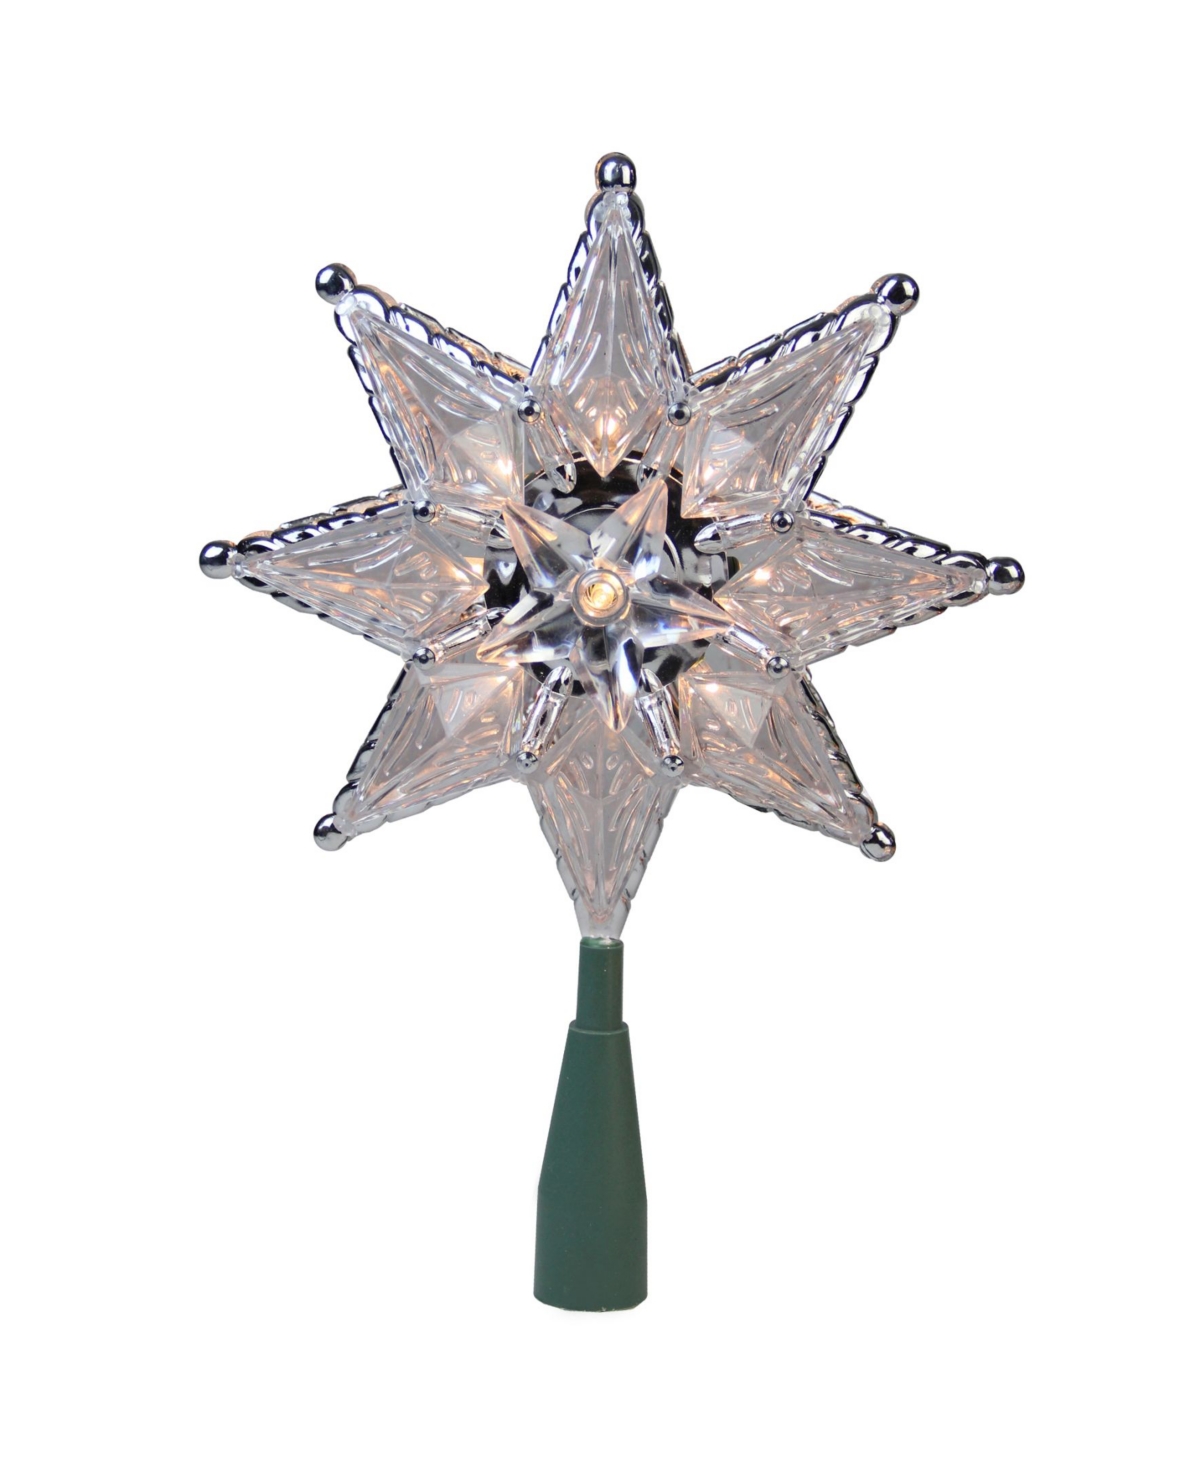 8" Silver Mosaic 8-Point Star Christmas Tree Topper - Clear Lights - Silver